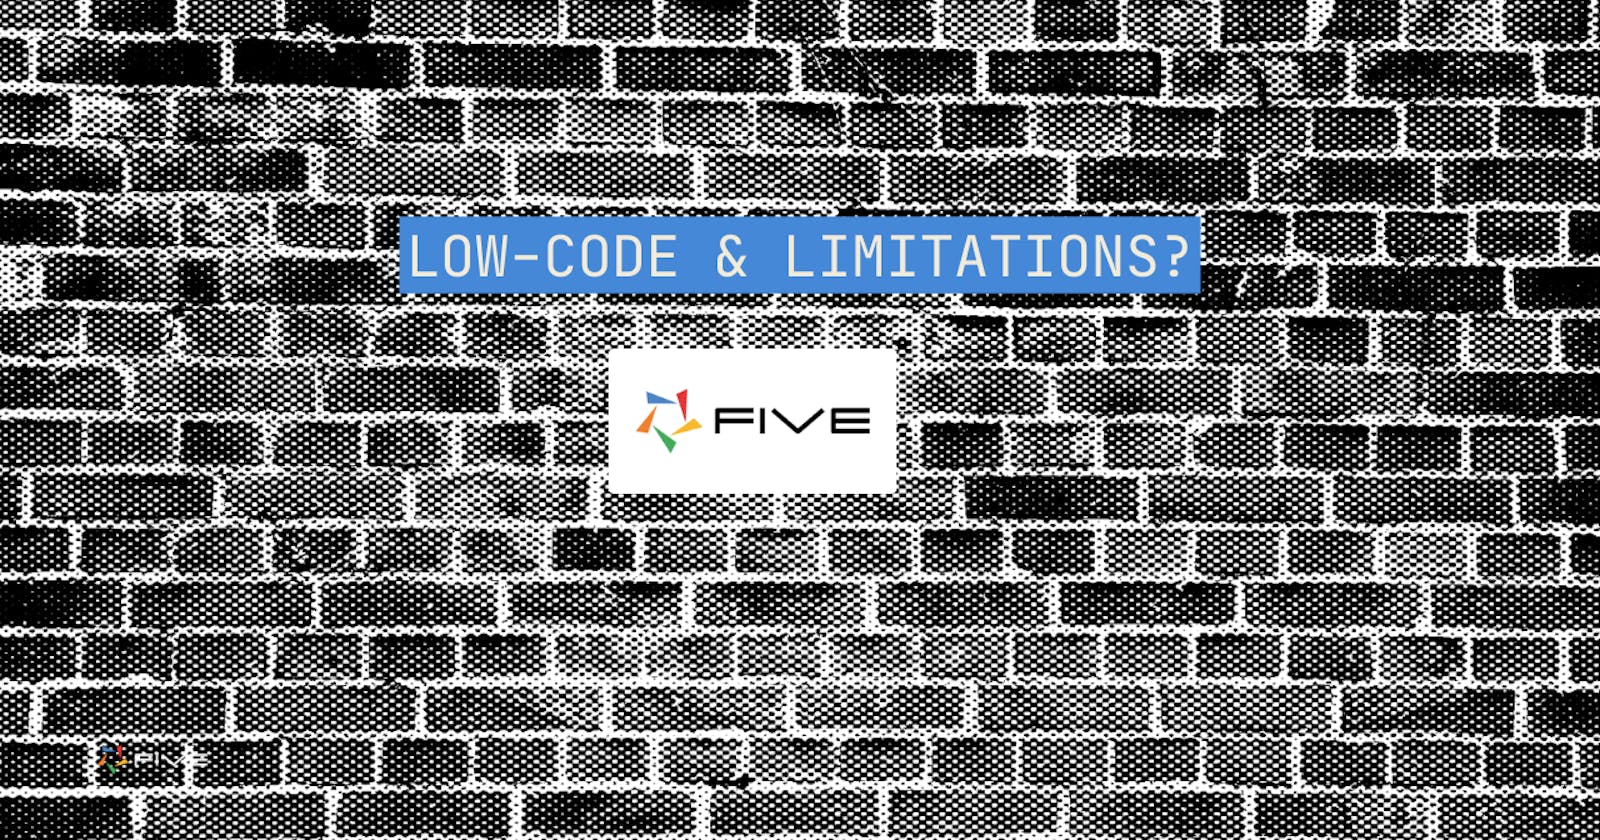 Low-Code & Limitations: Where Is The Brick Wall?